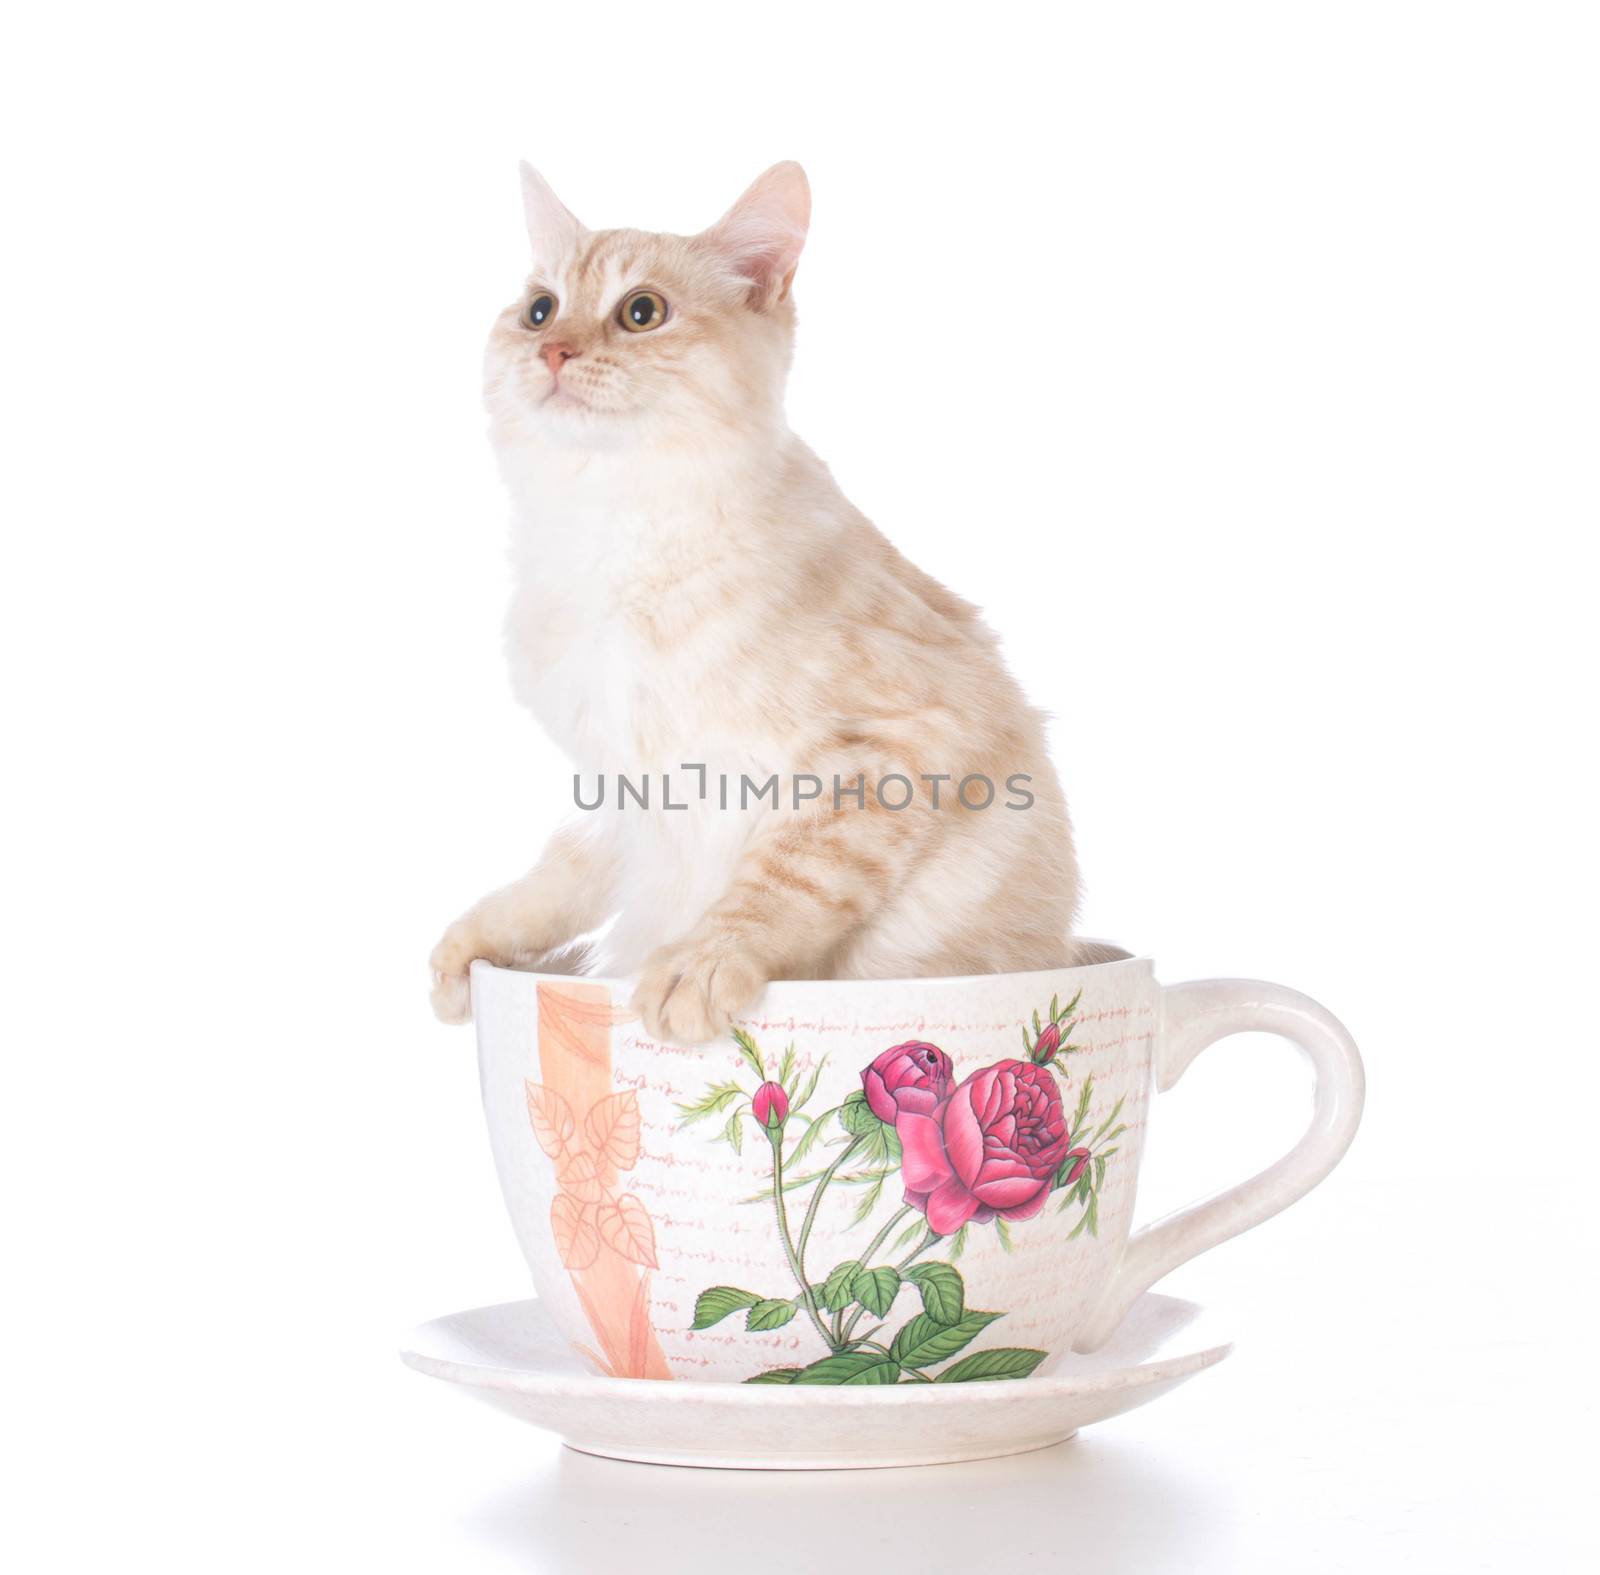 kitten in a teacup by willeecole123